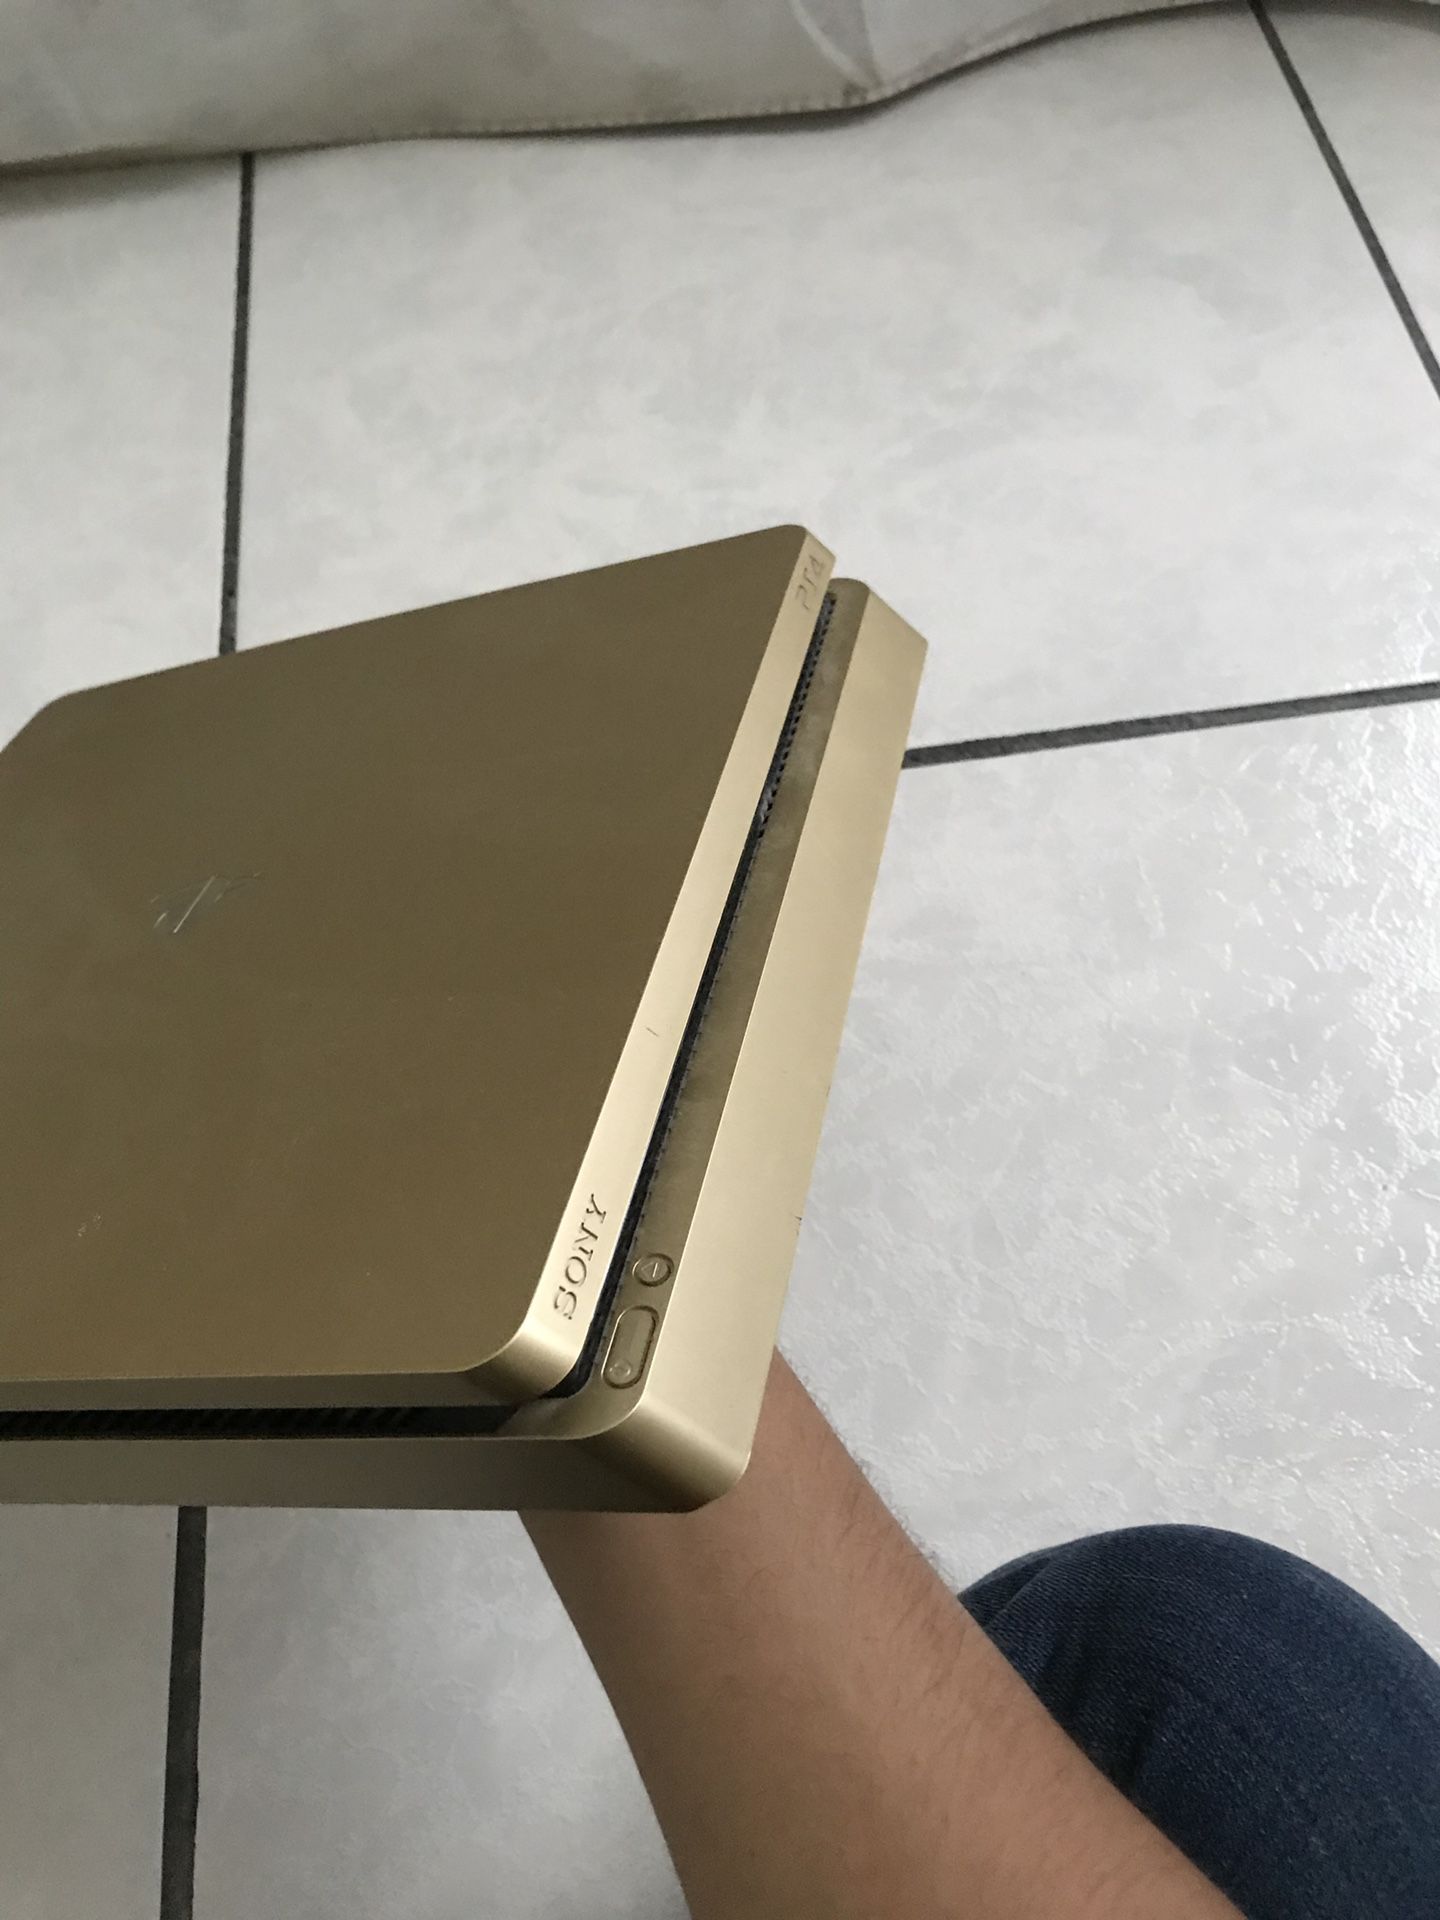 Ps4 gold edition 1tb